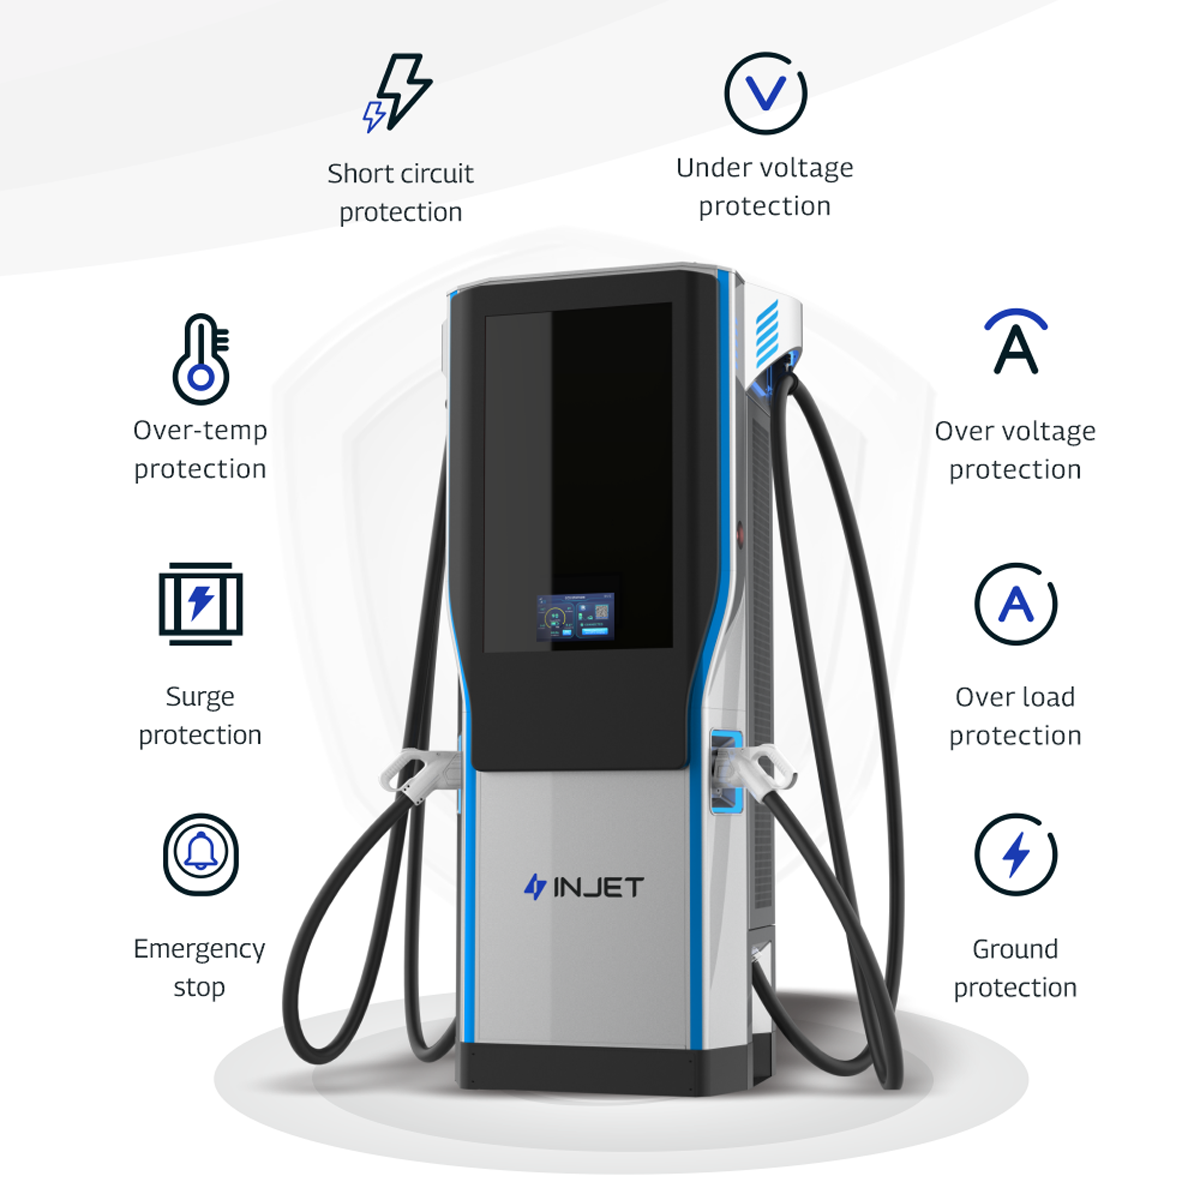 Ampax From Injet New Energy: All-rounder